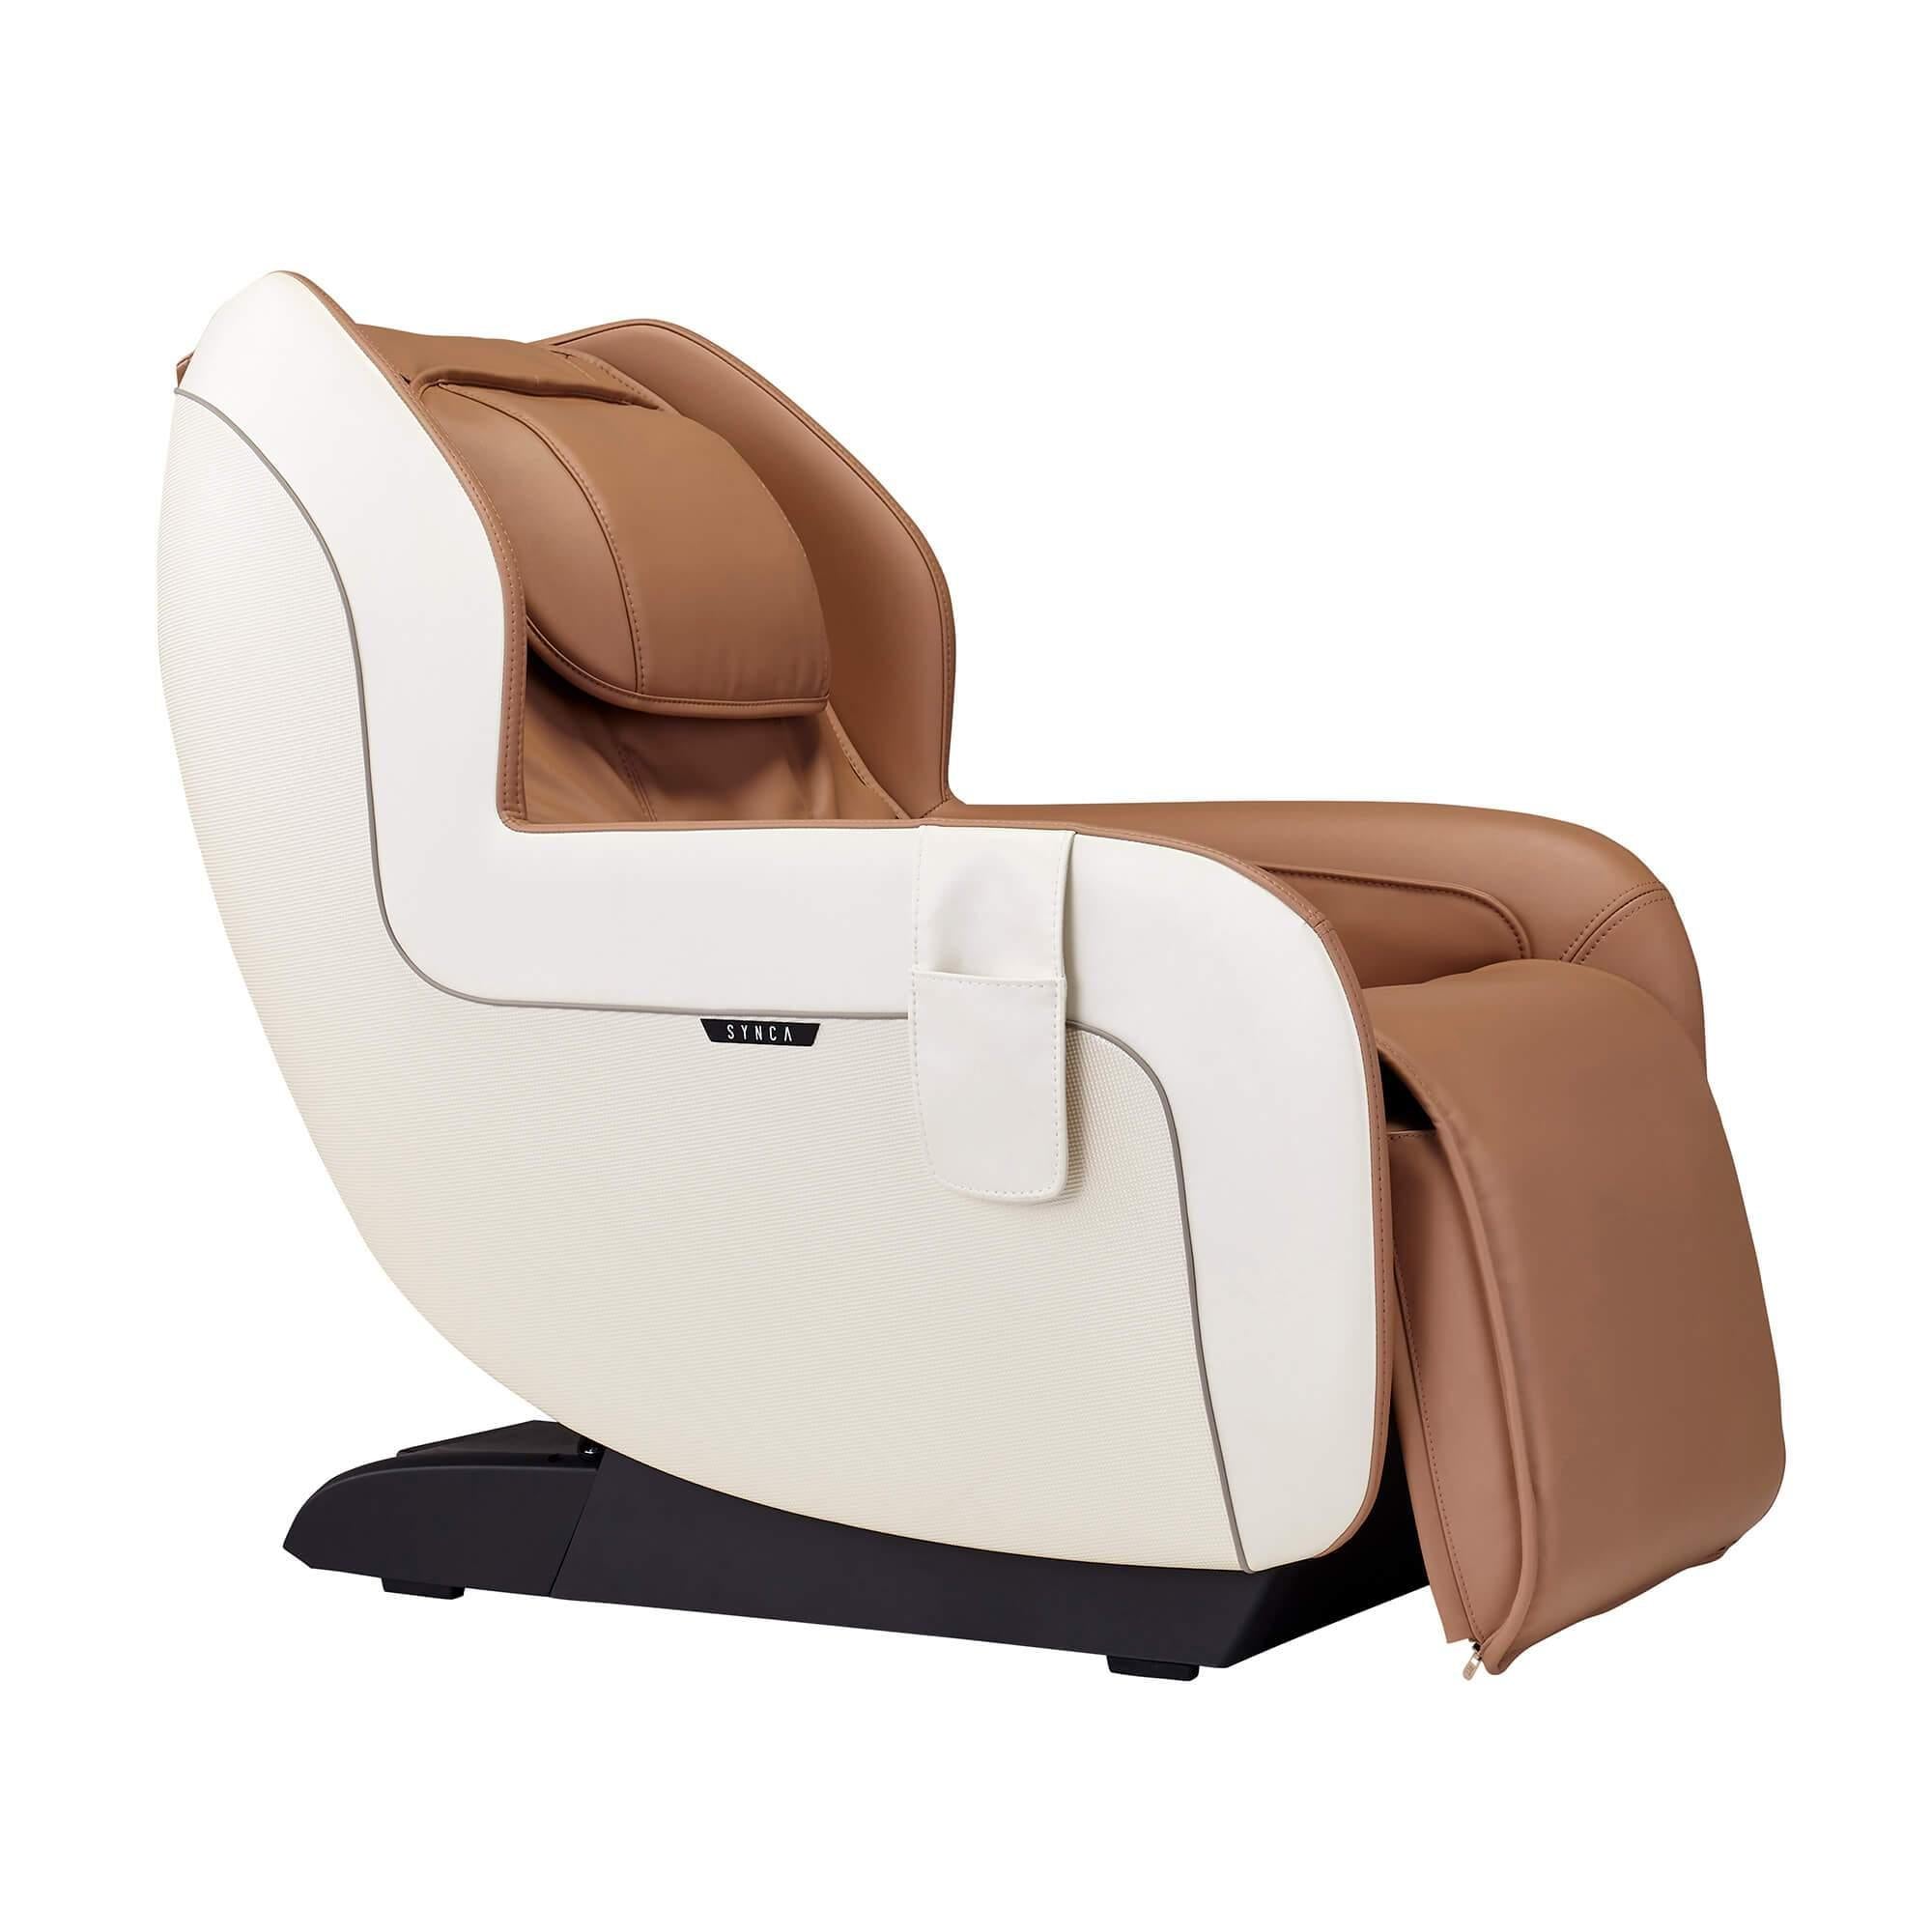 Synca CirC Plus Massage Chair and Comfort ZEBRA - Style CHAIRS MASSAGE – Unmatched